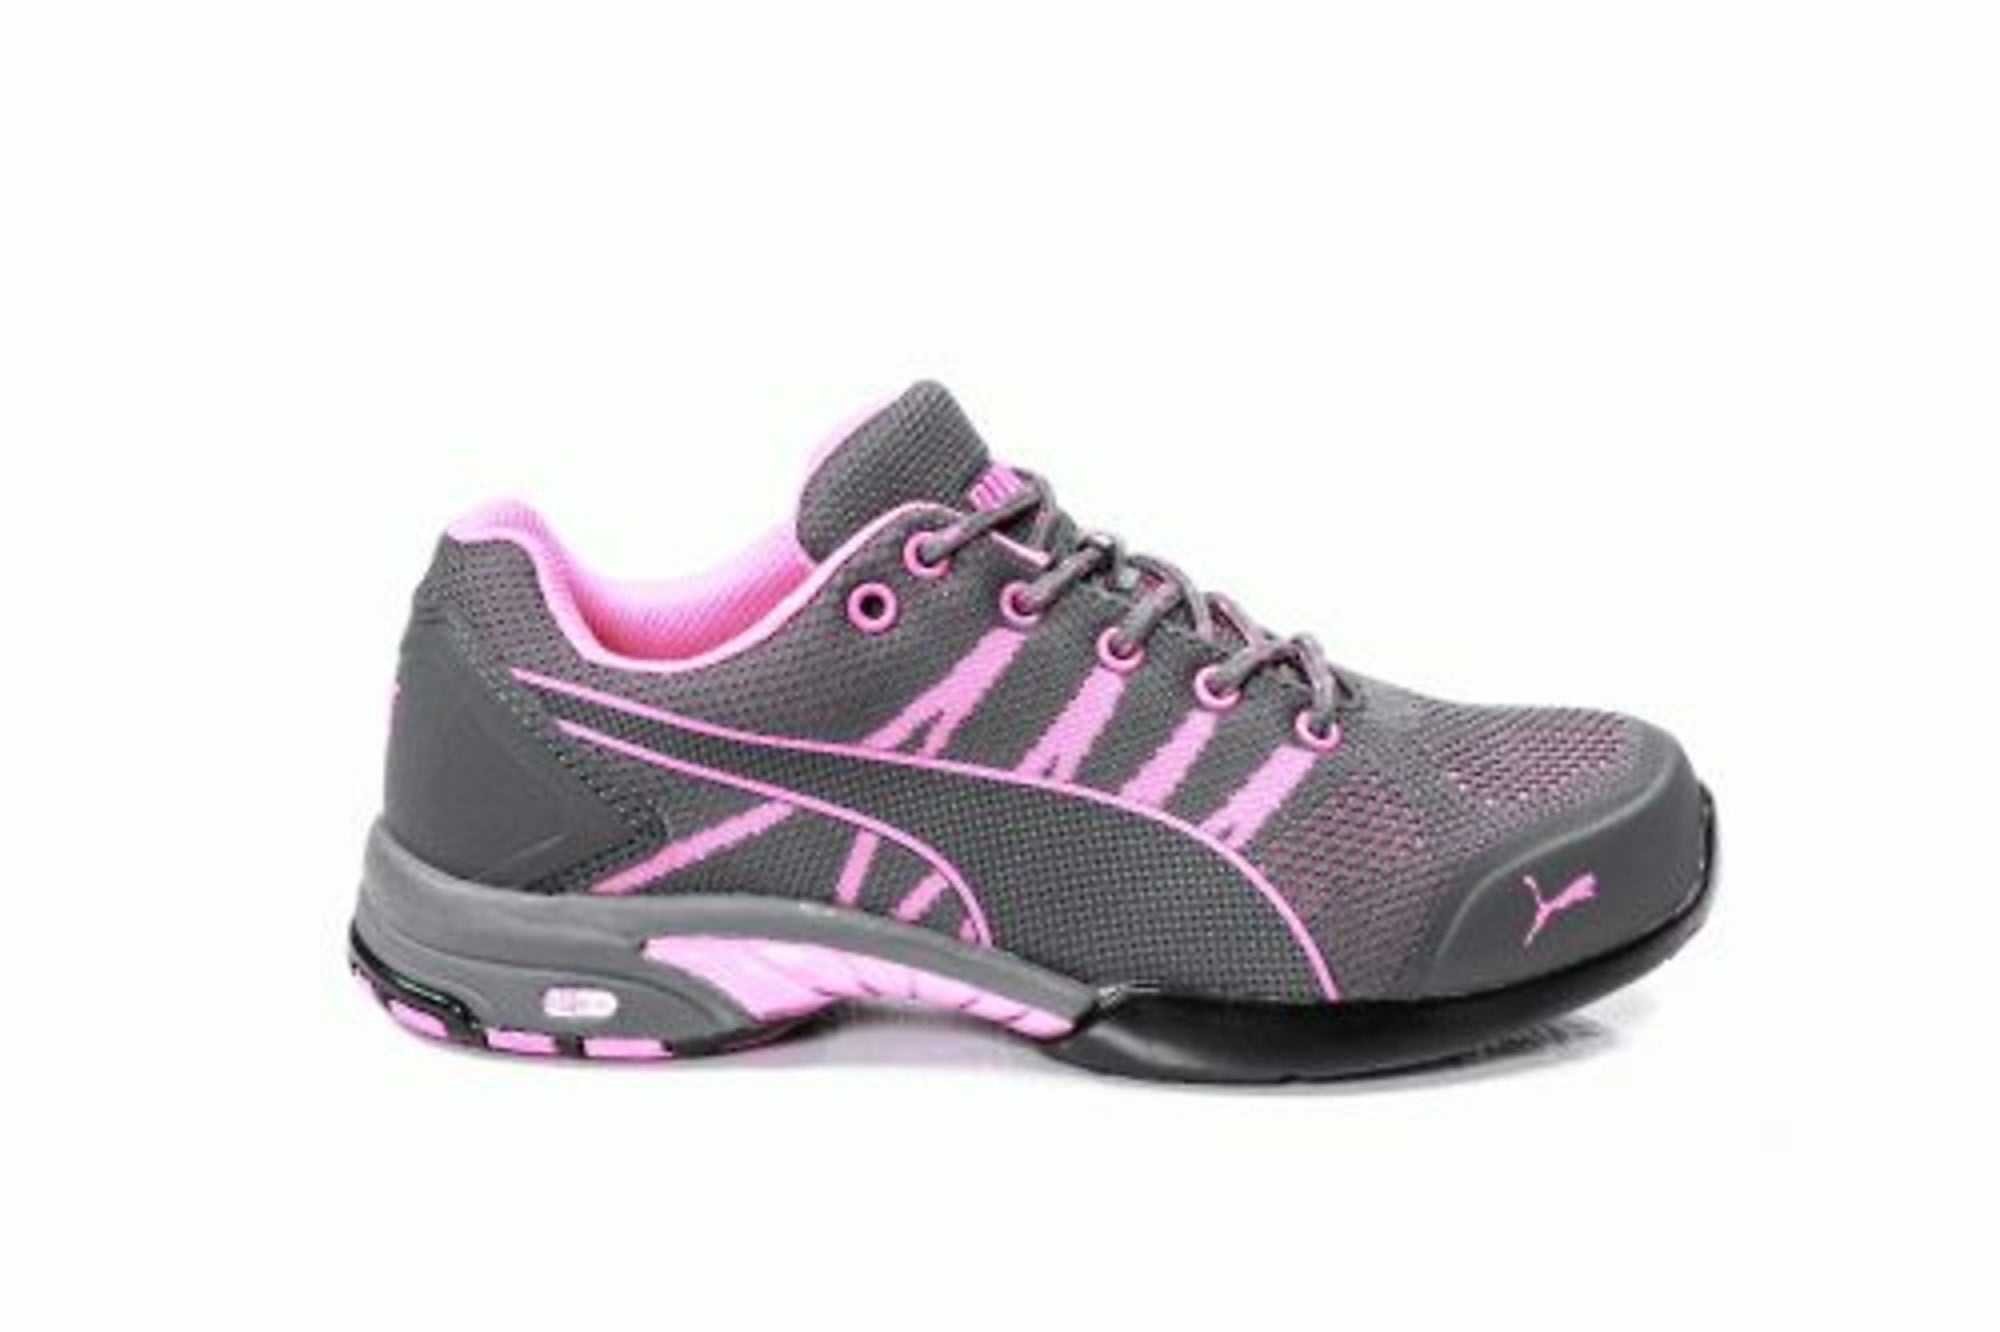 puma safety shoes for ladies